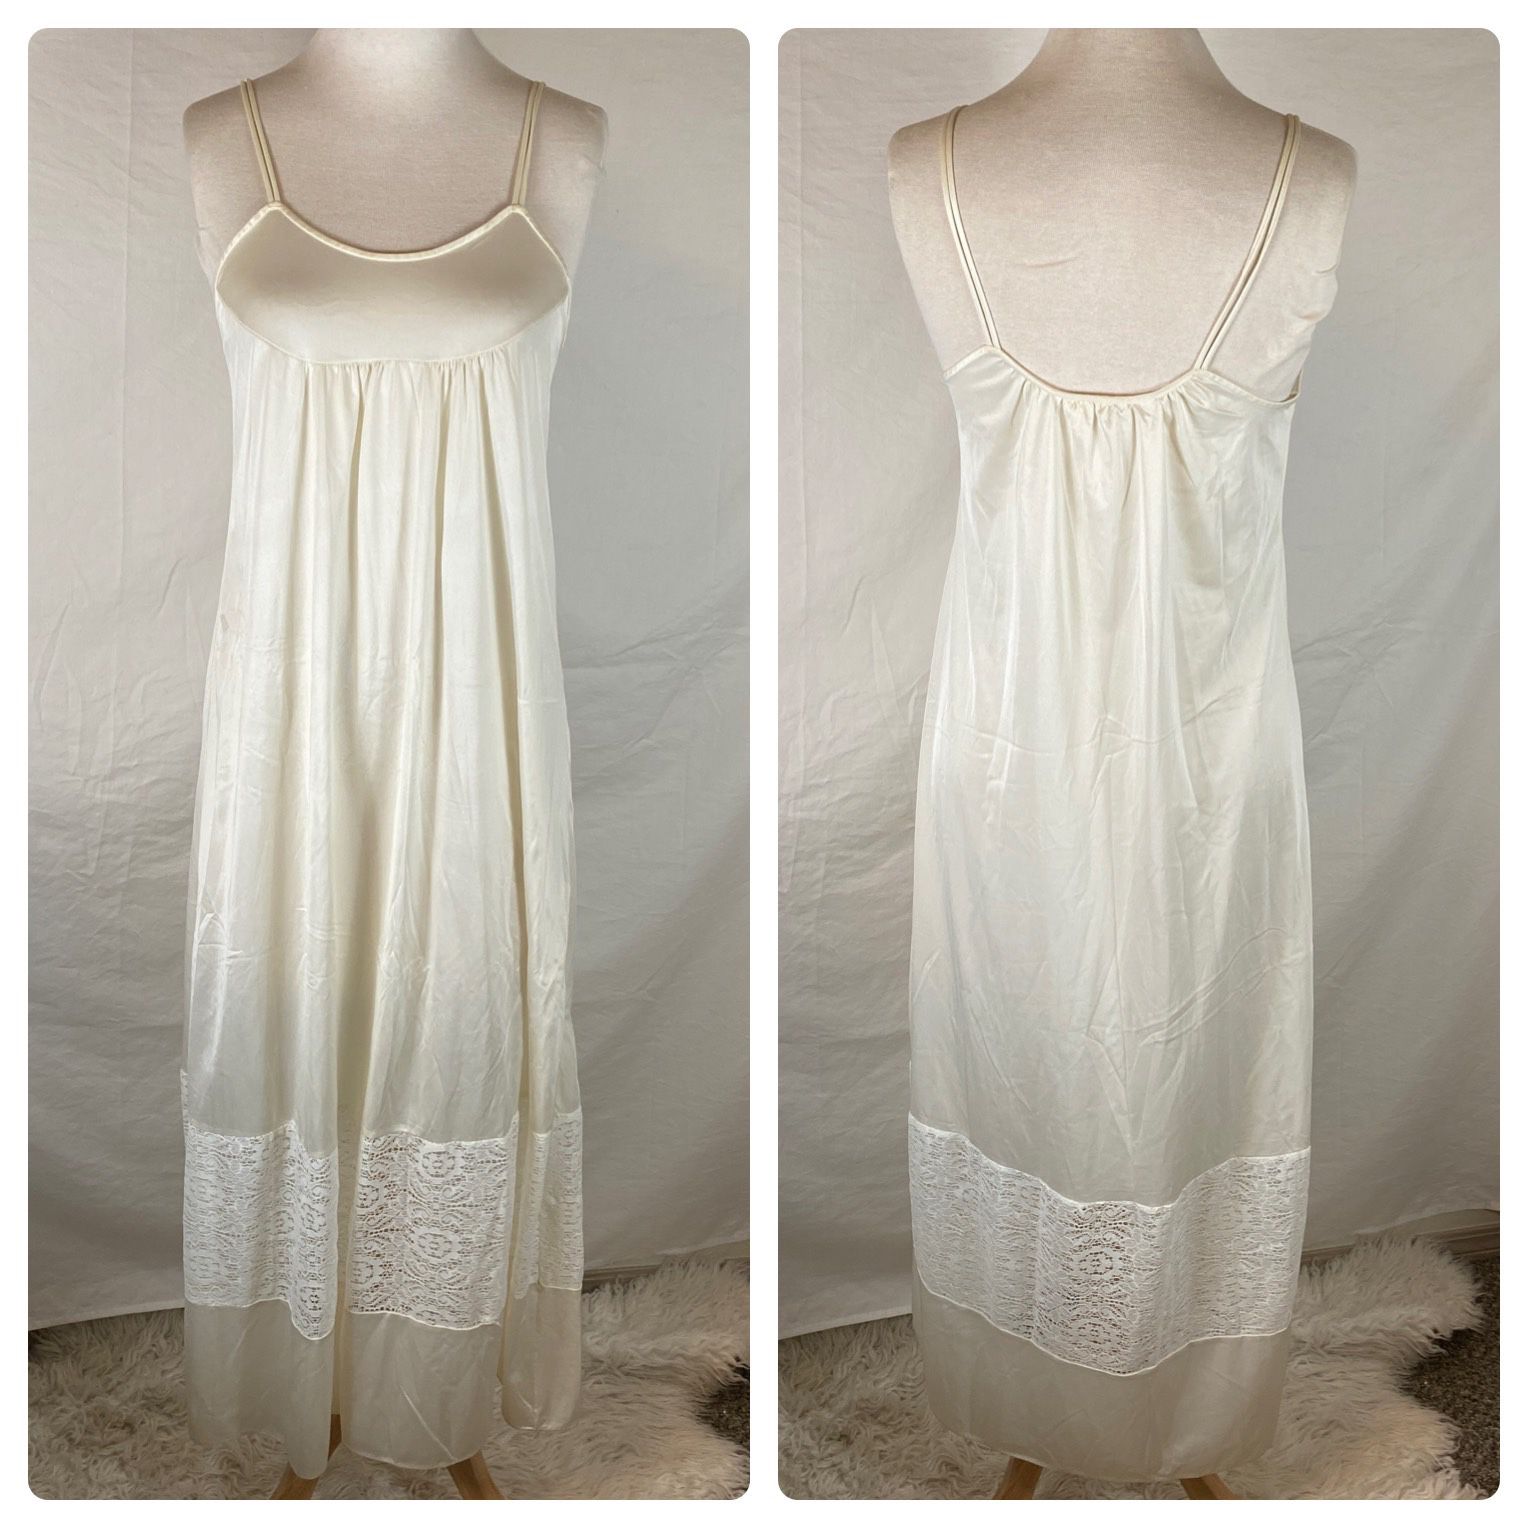 Vintage 70s Montgomery Ward Slip Nightgown Dress Floral Lace USA Made Sz S